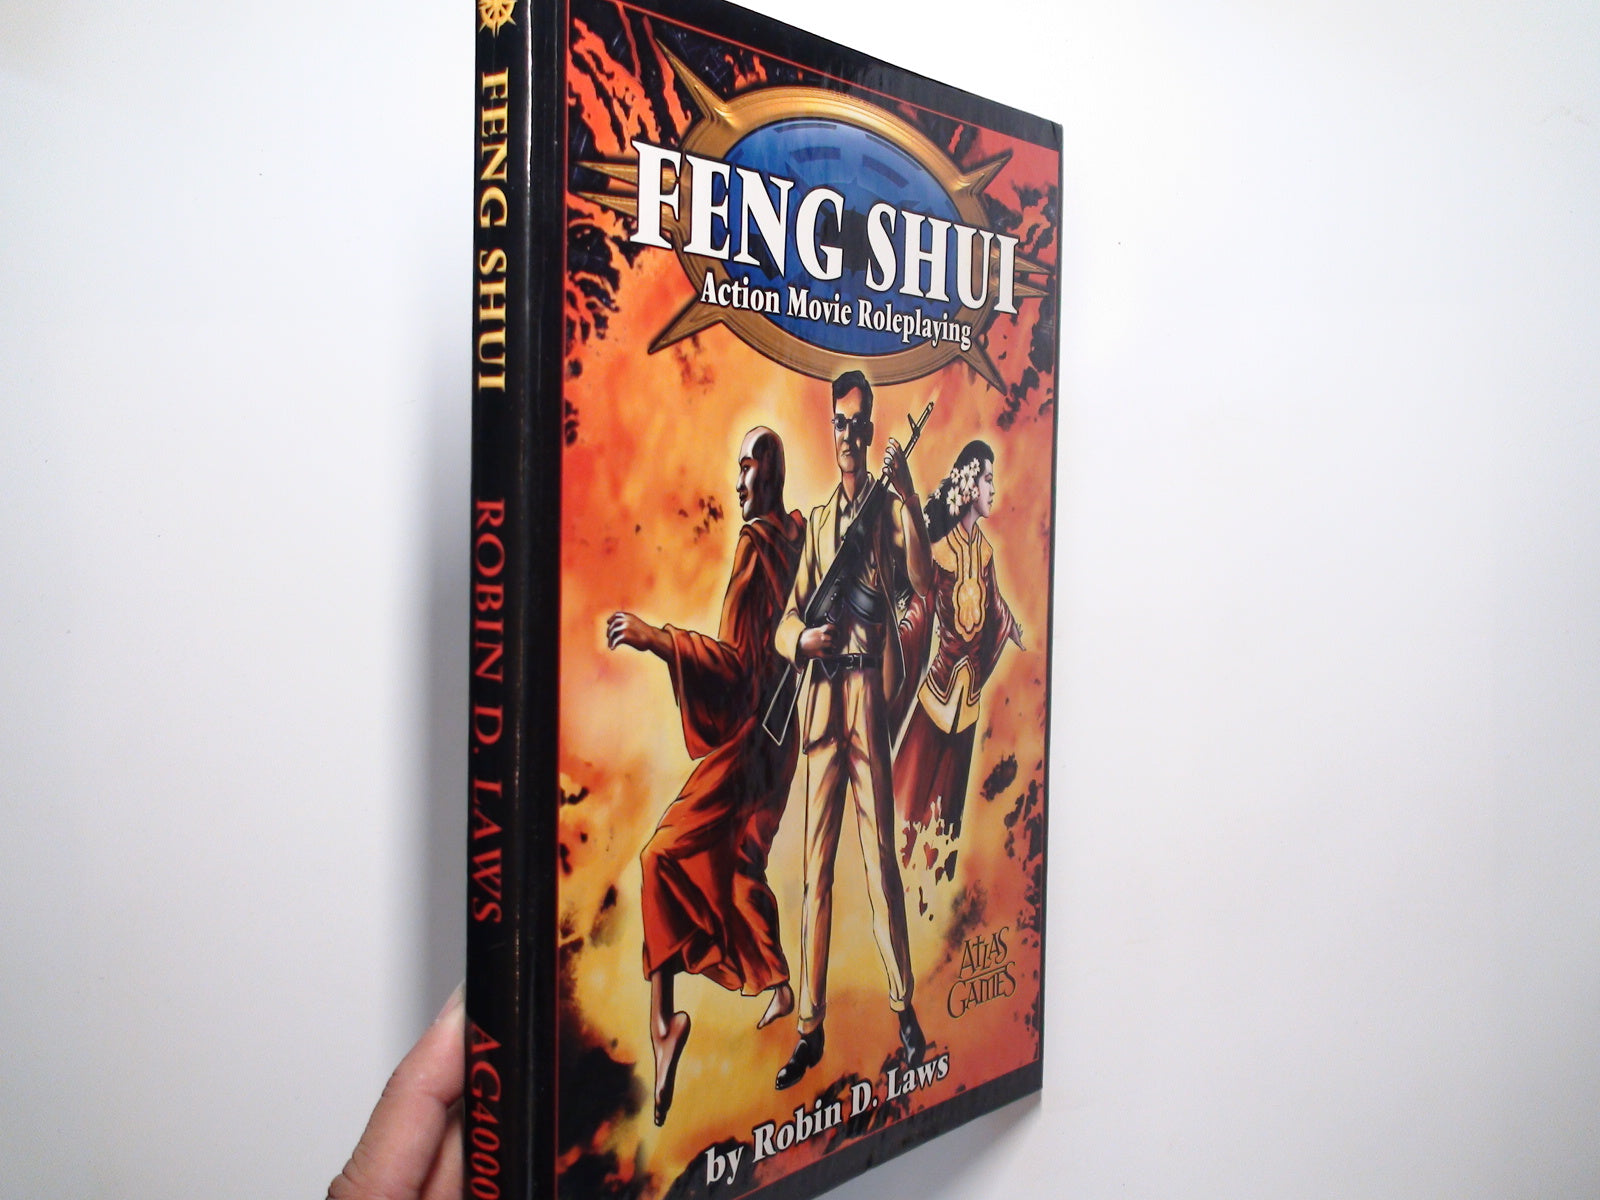 Feng Shui Action Movie Roleplaying, By Robin D. Laws, Atlas Games #AG4000, 1999